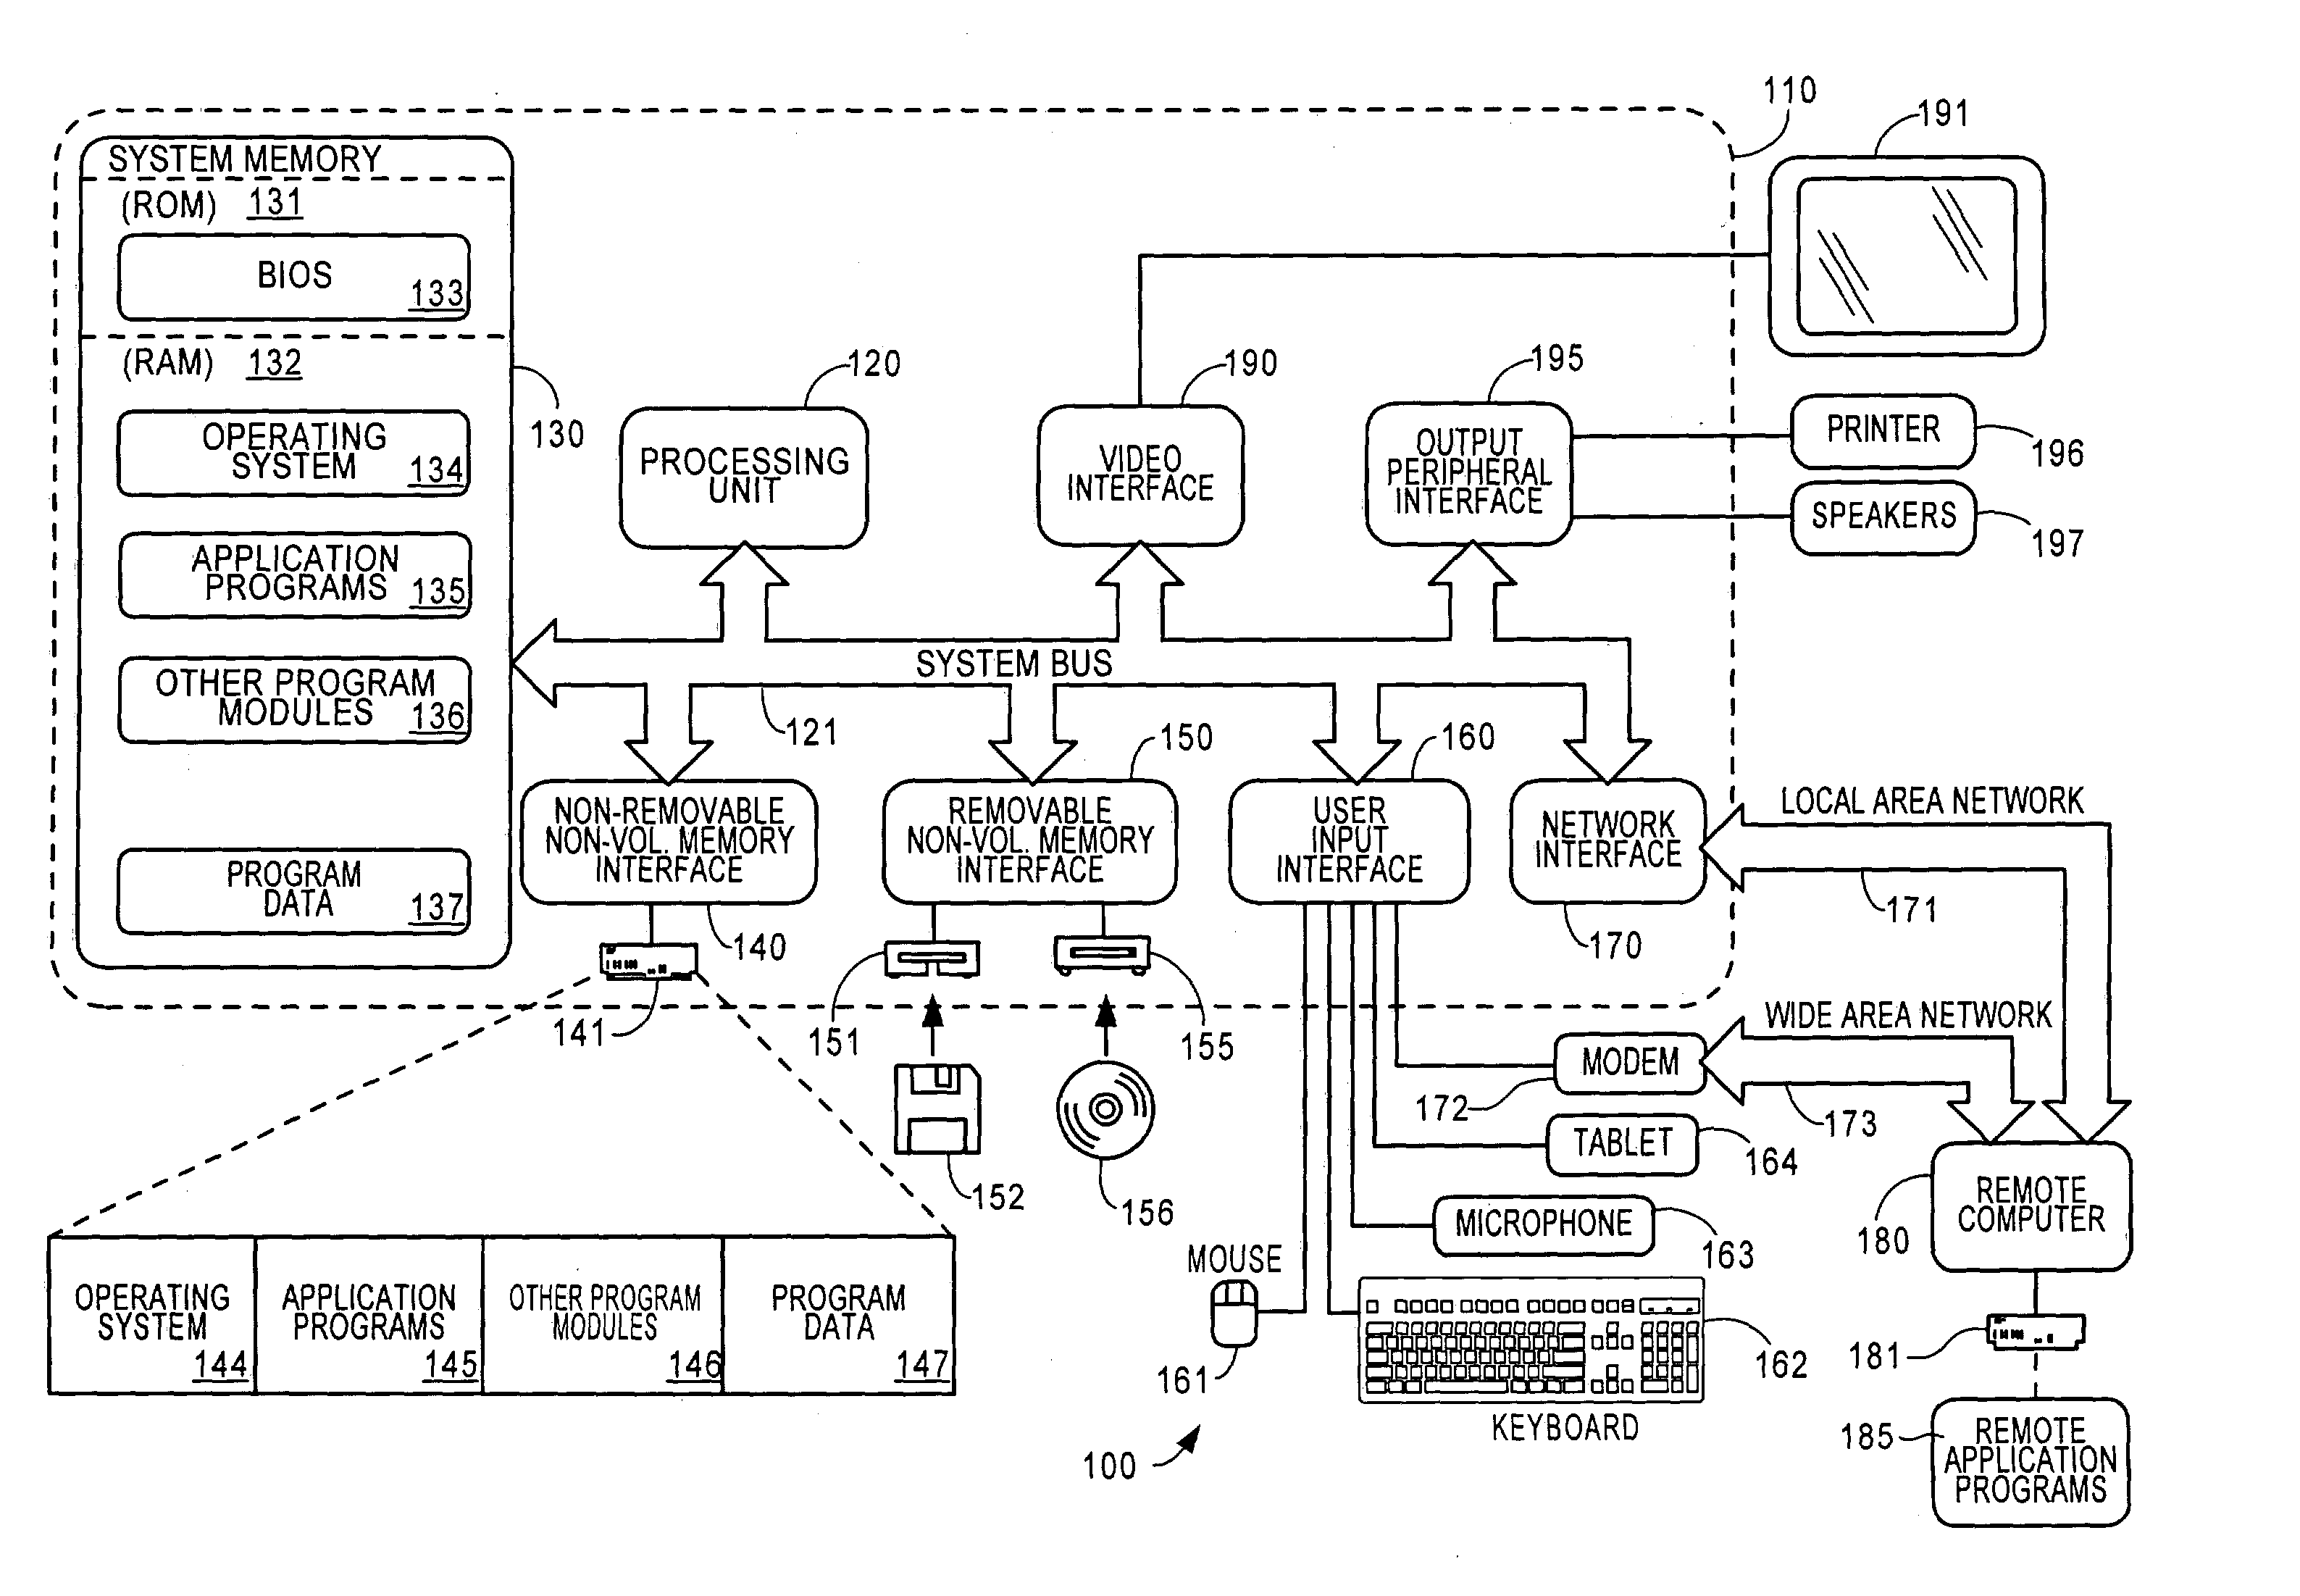 Multi-layer based method for implementing network firewalls